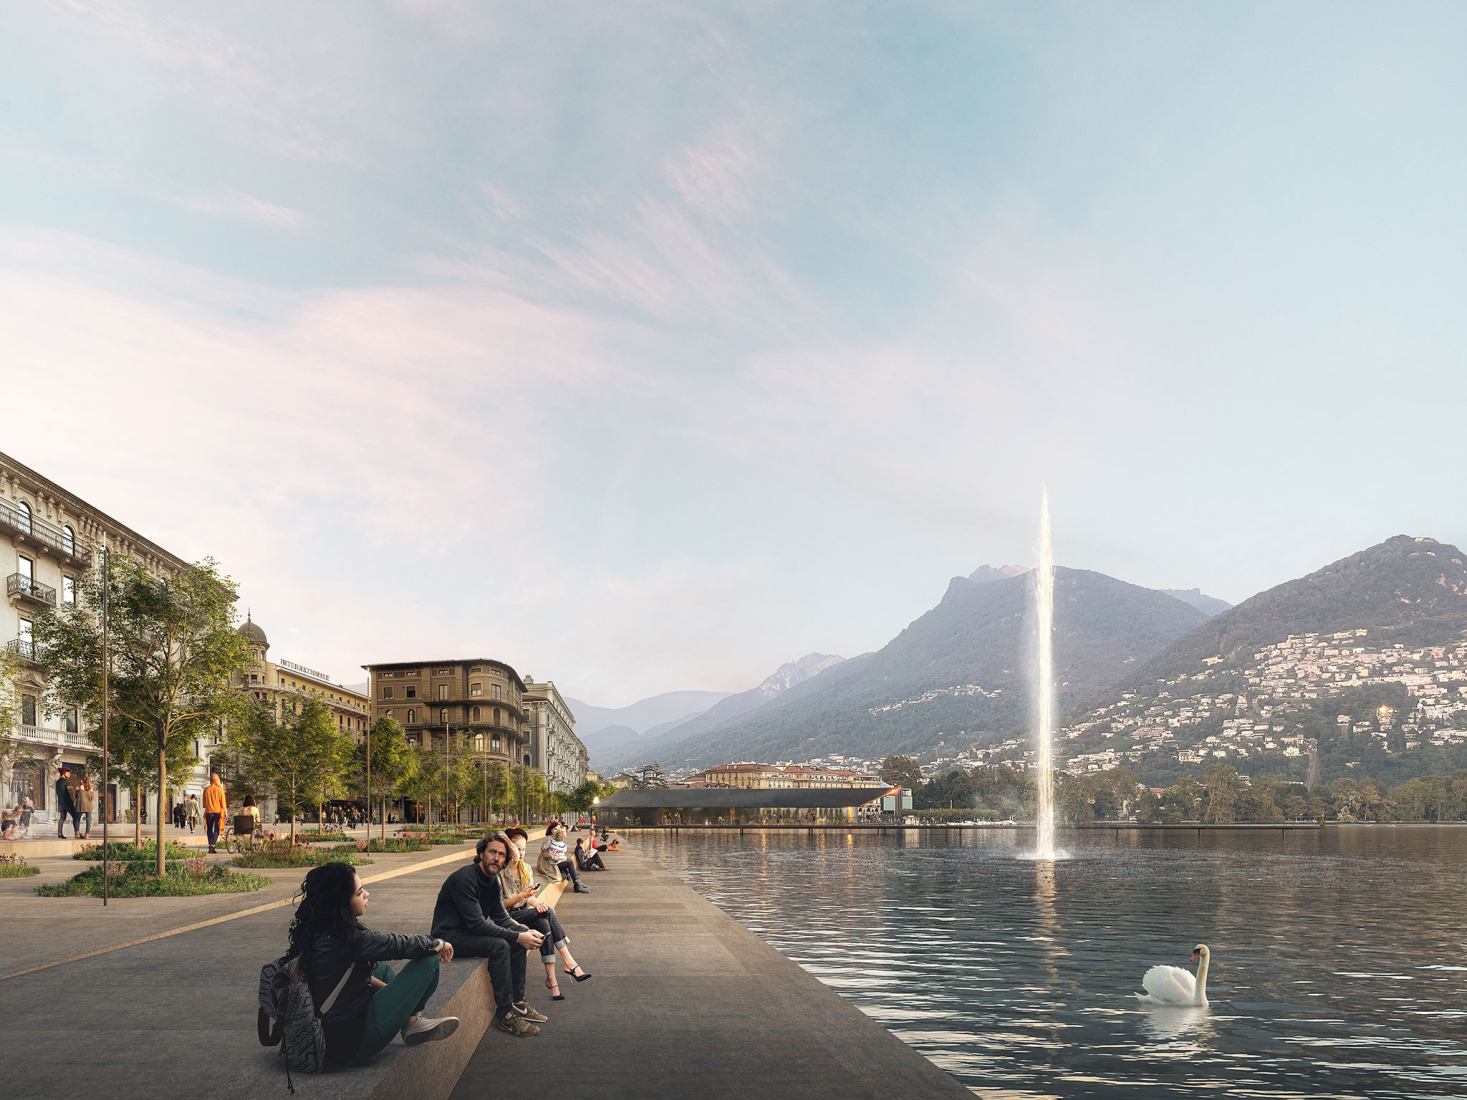 Redevelopment of Belvedere garden, new landing stage, stairway section and Angioli funicular, Tassino park by Vaillo + Irigaray Architects. Rendering by Maria Victoria Porro, Vaillo + Irigaray.